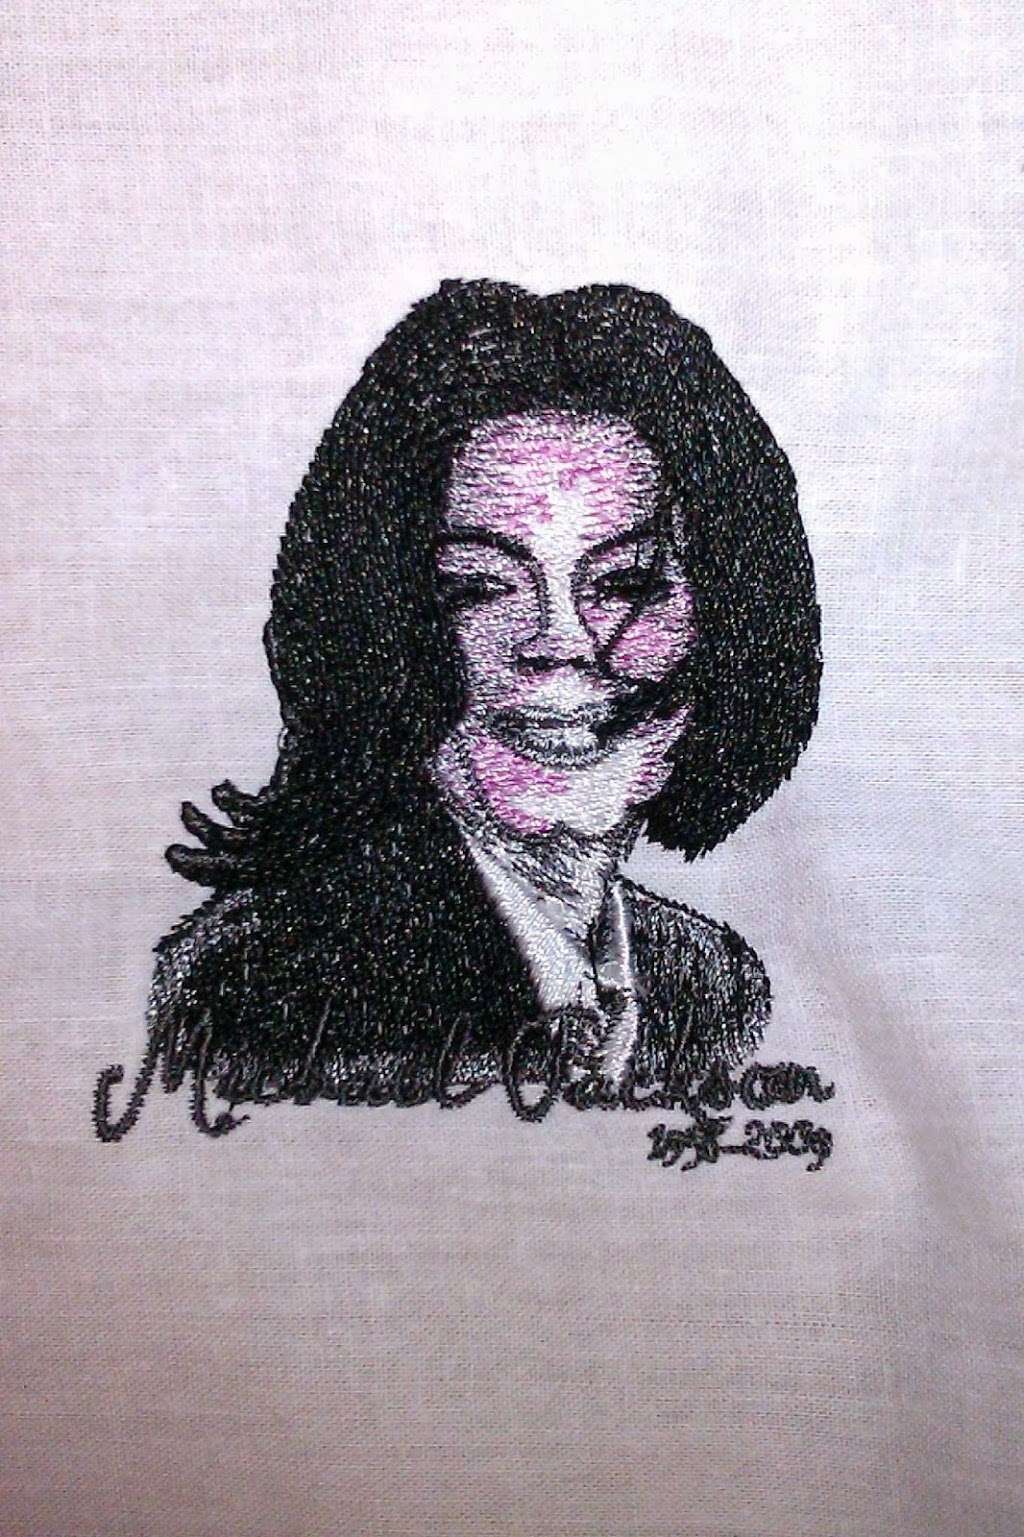 Fabric Art by Braggs Embroidery | 9215 Sunlit Park Dr, Humble, TX 77396 | Phone: (832) 777-1400